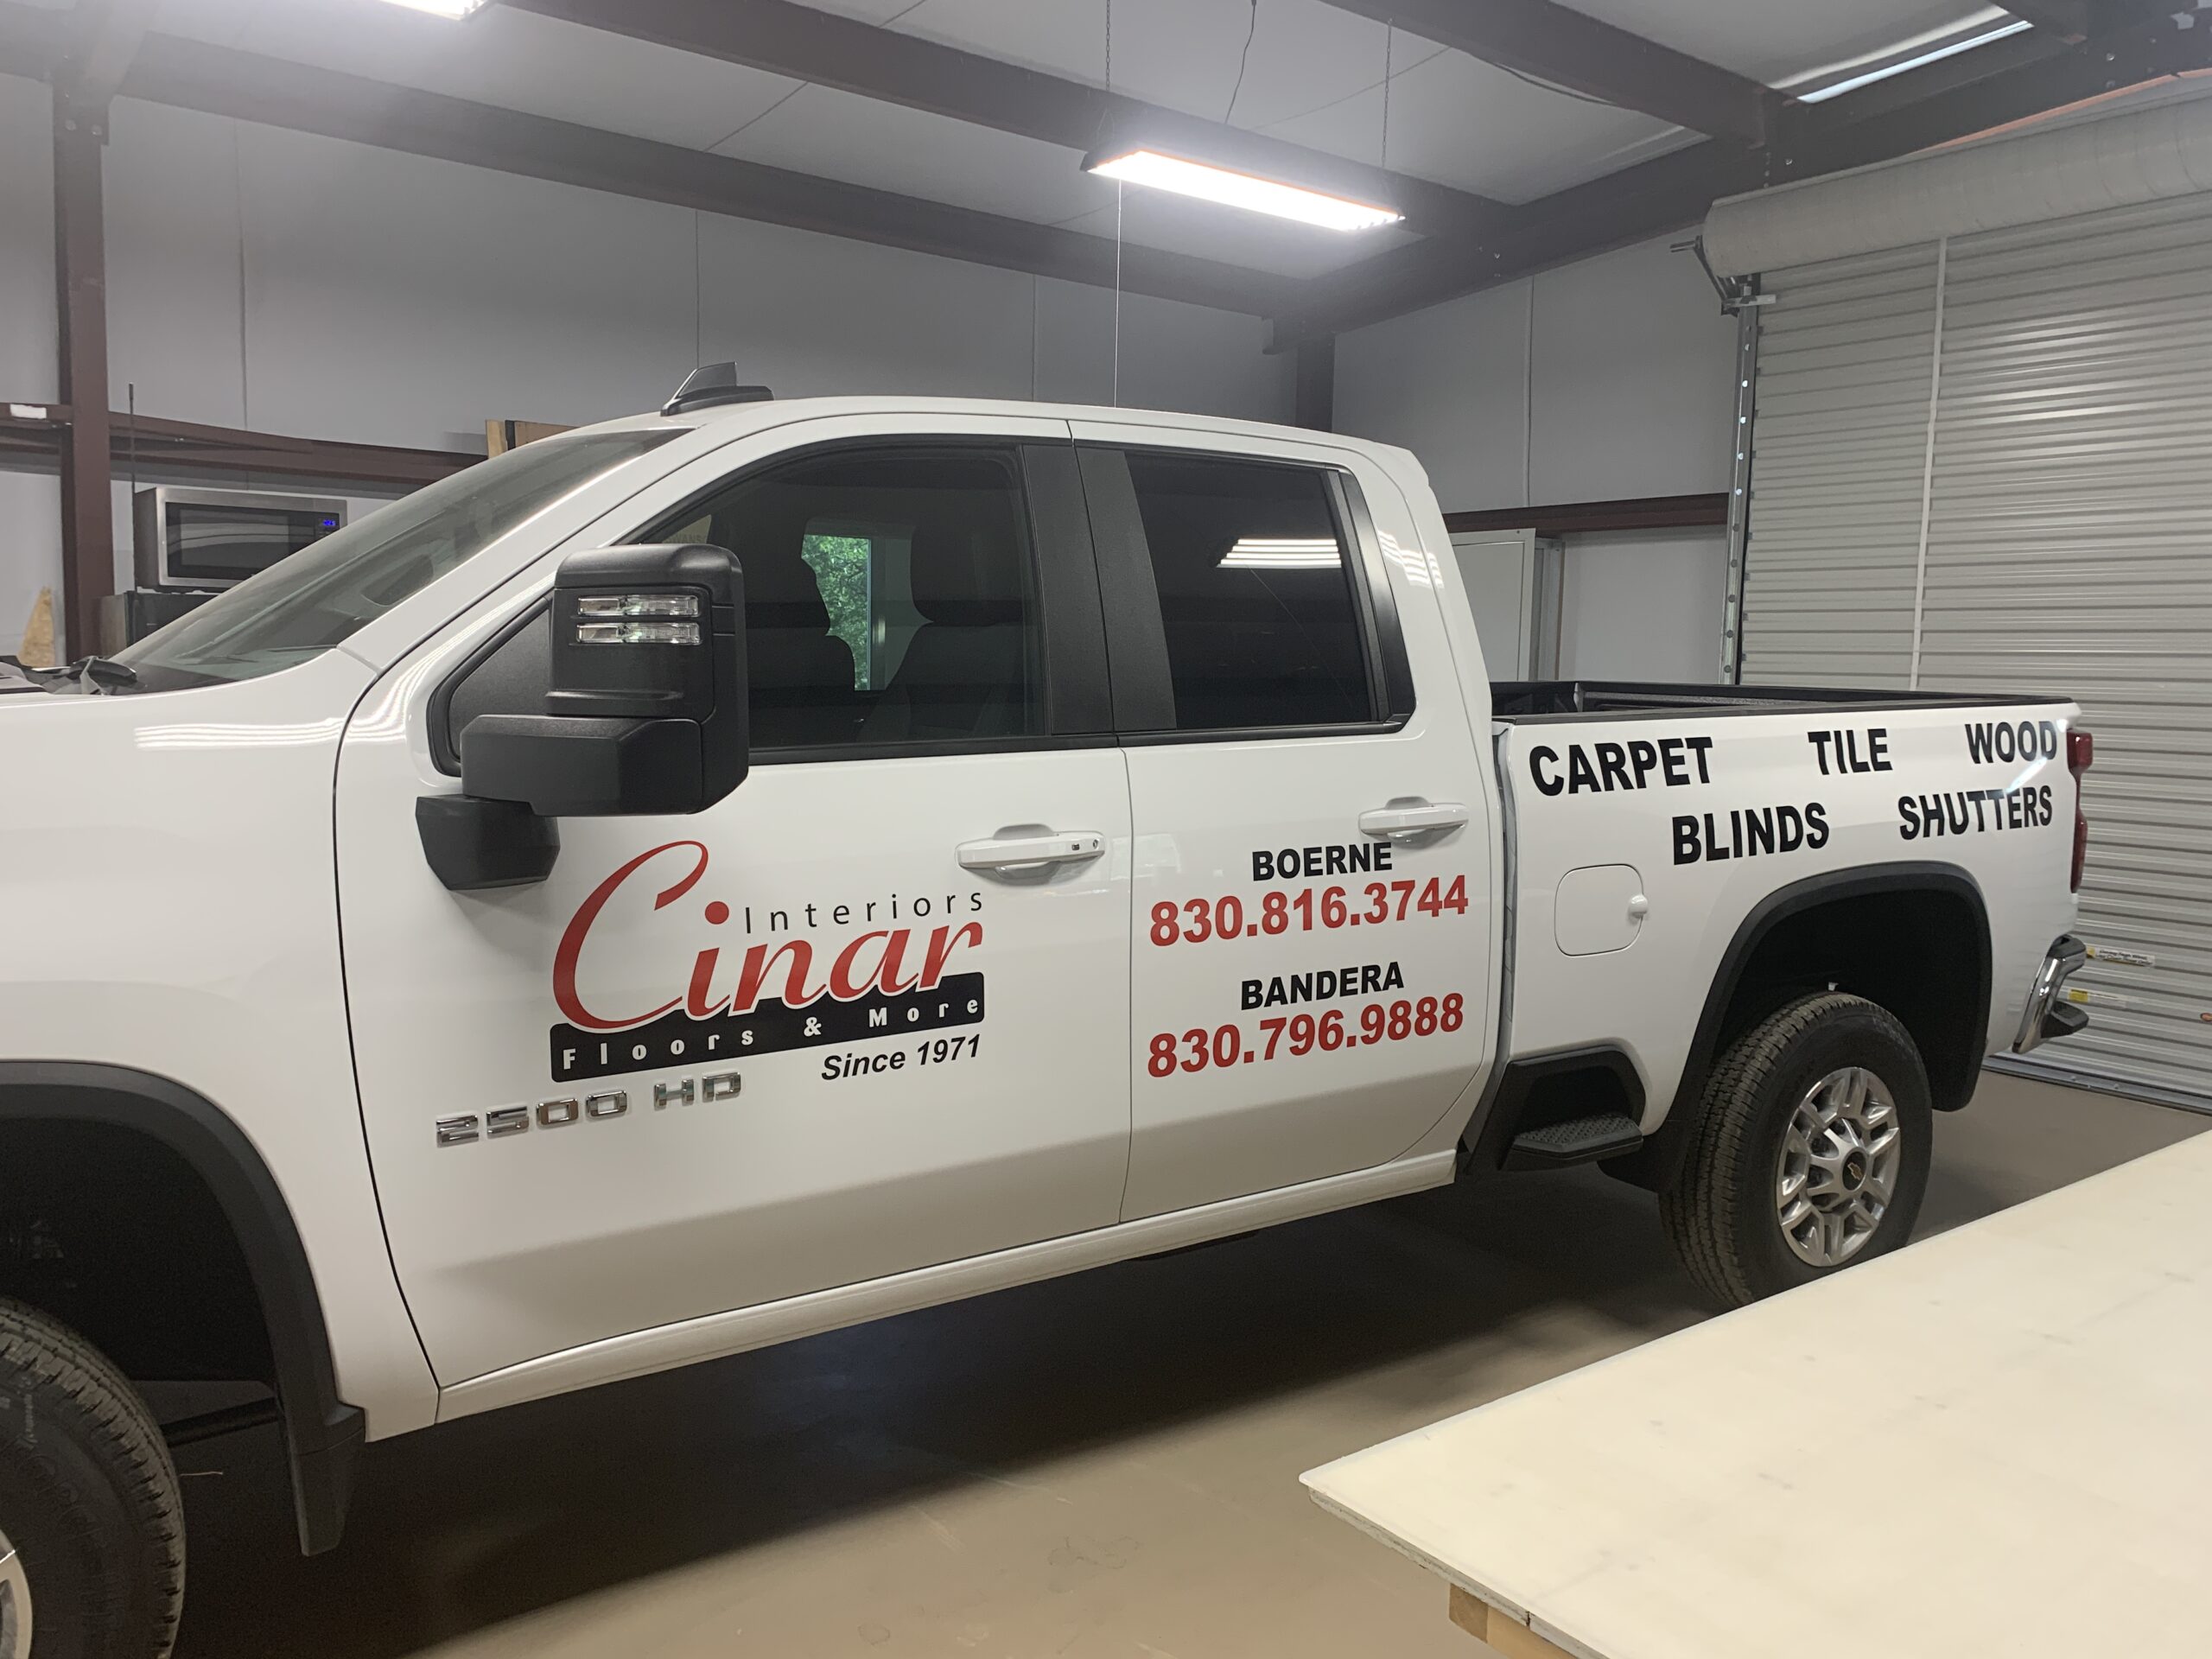 Vehicle Graphics on the cab and bed of pickup truck